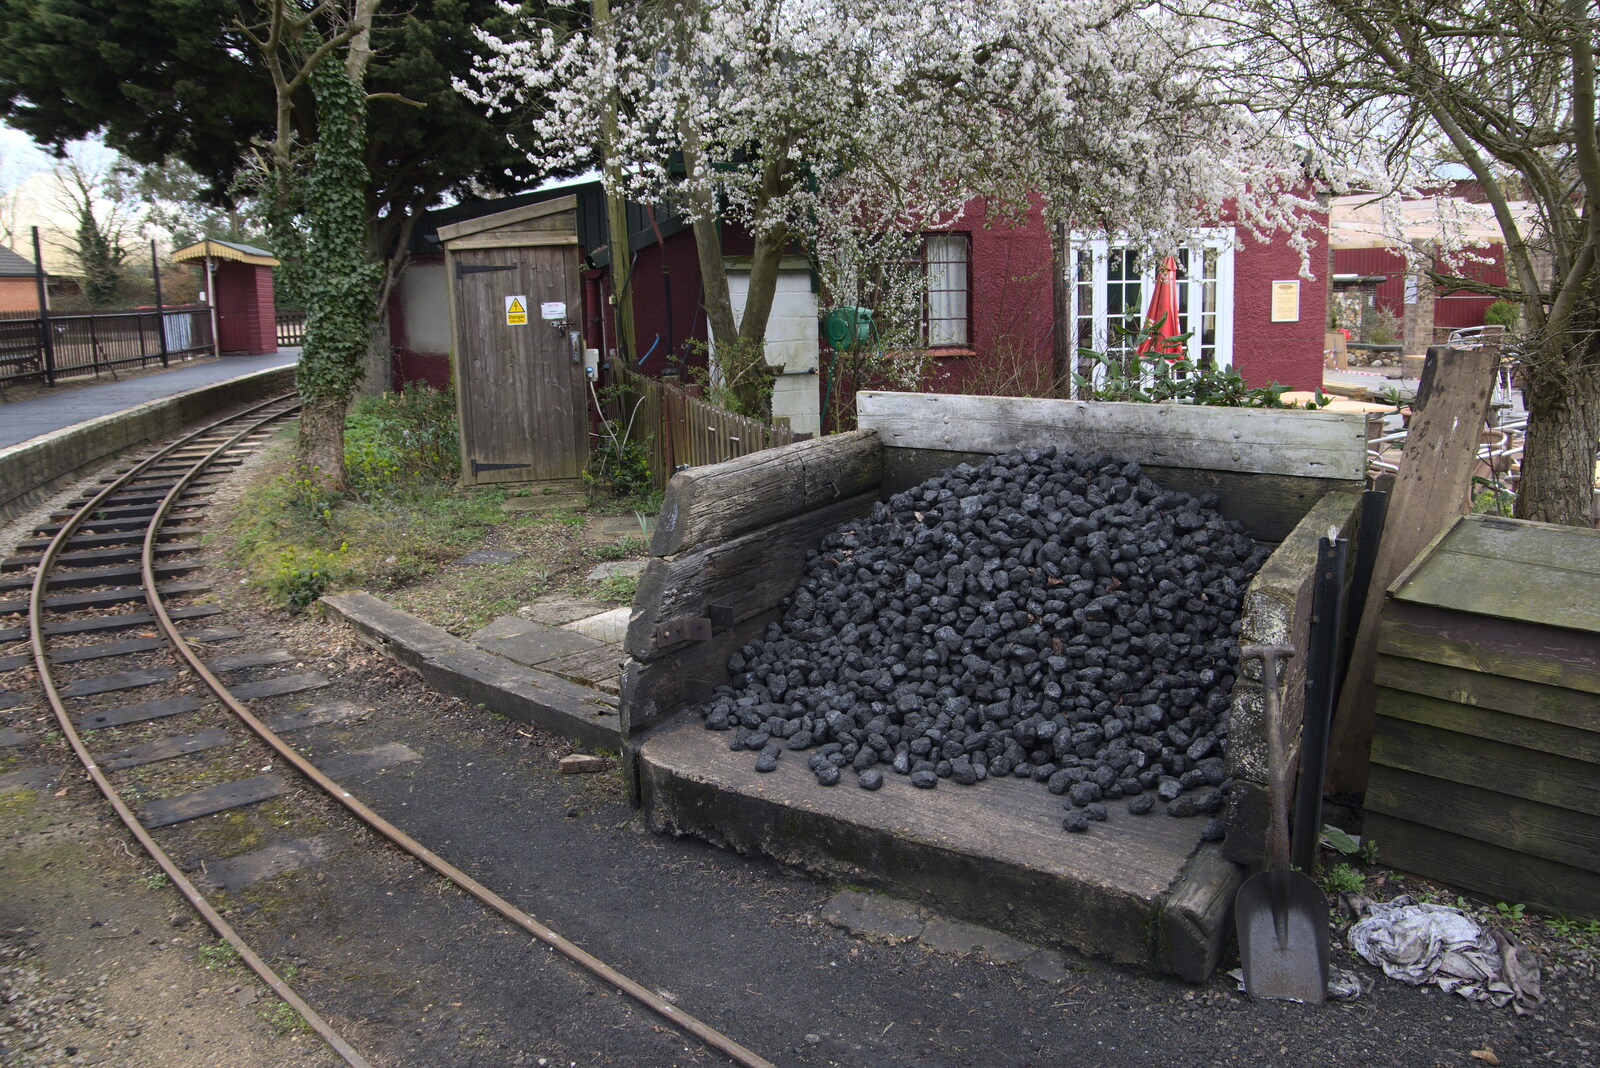 The coal pile from A Return to Bressingham Steam and Gardens, Bressingham, Norfolk - 28th March 2021